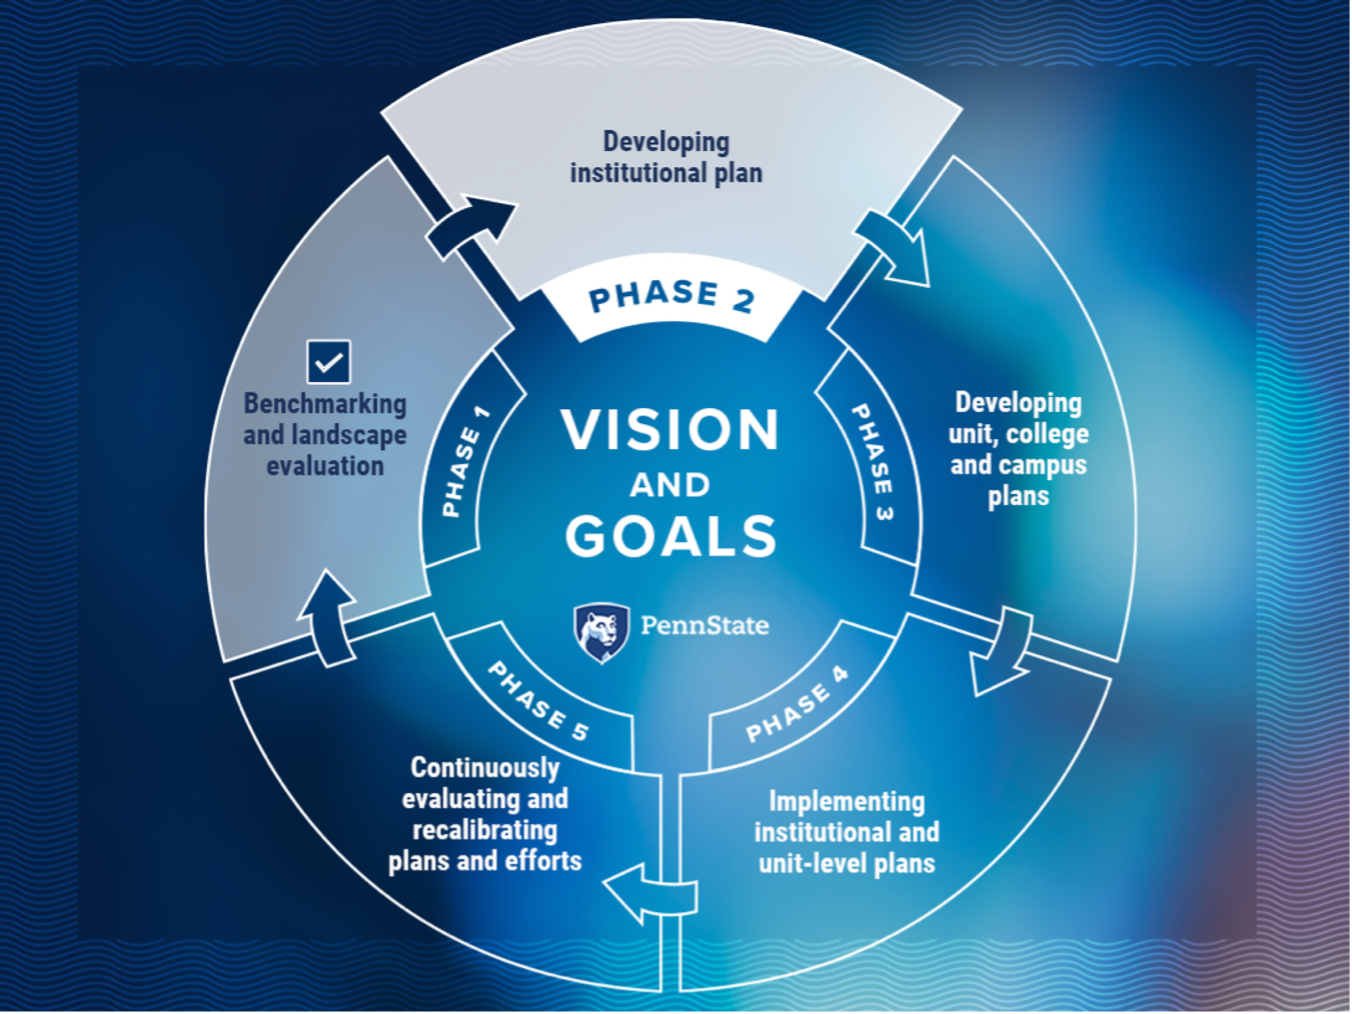 Graphic representing that the University is on phase 2 of the strategic planning process